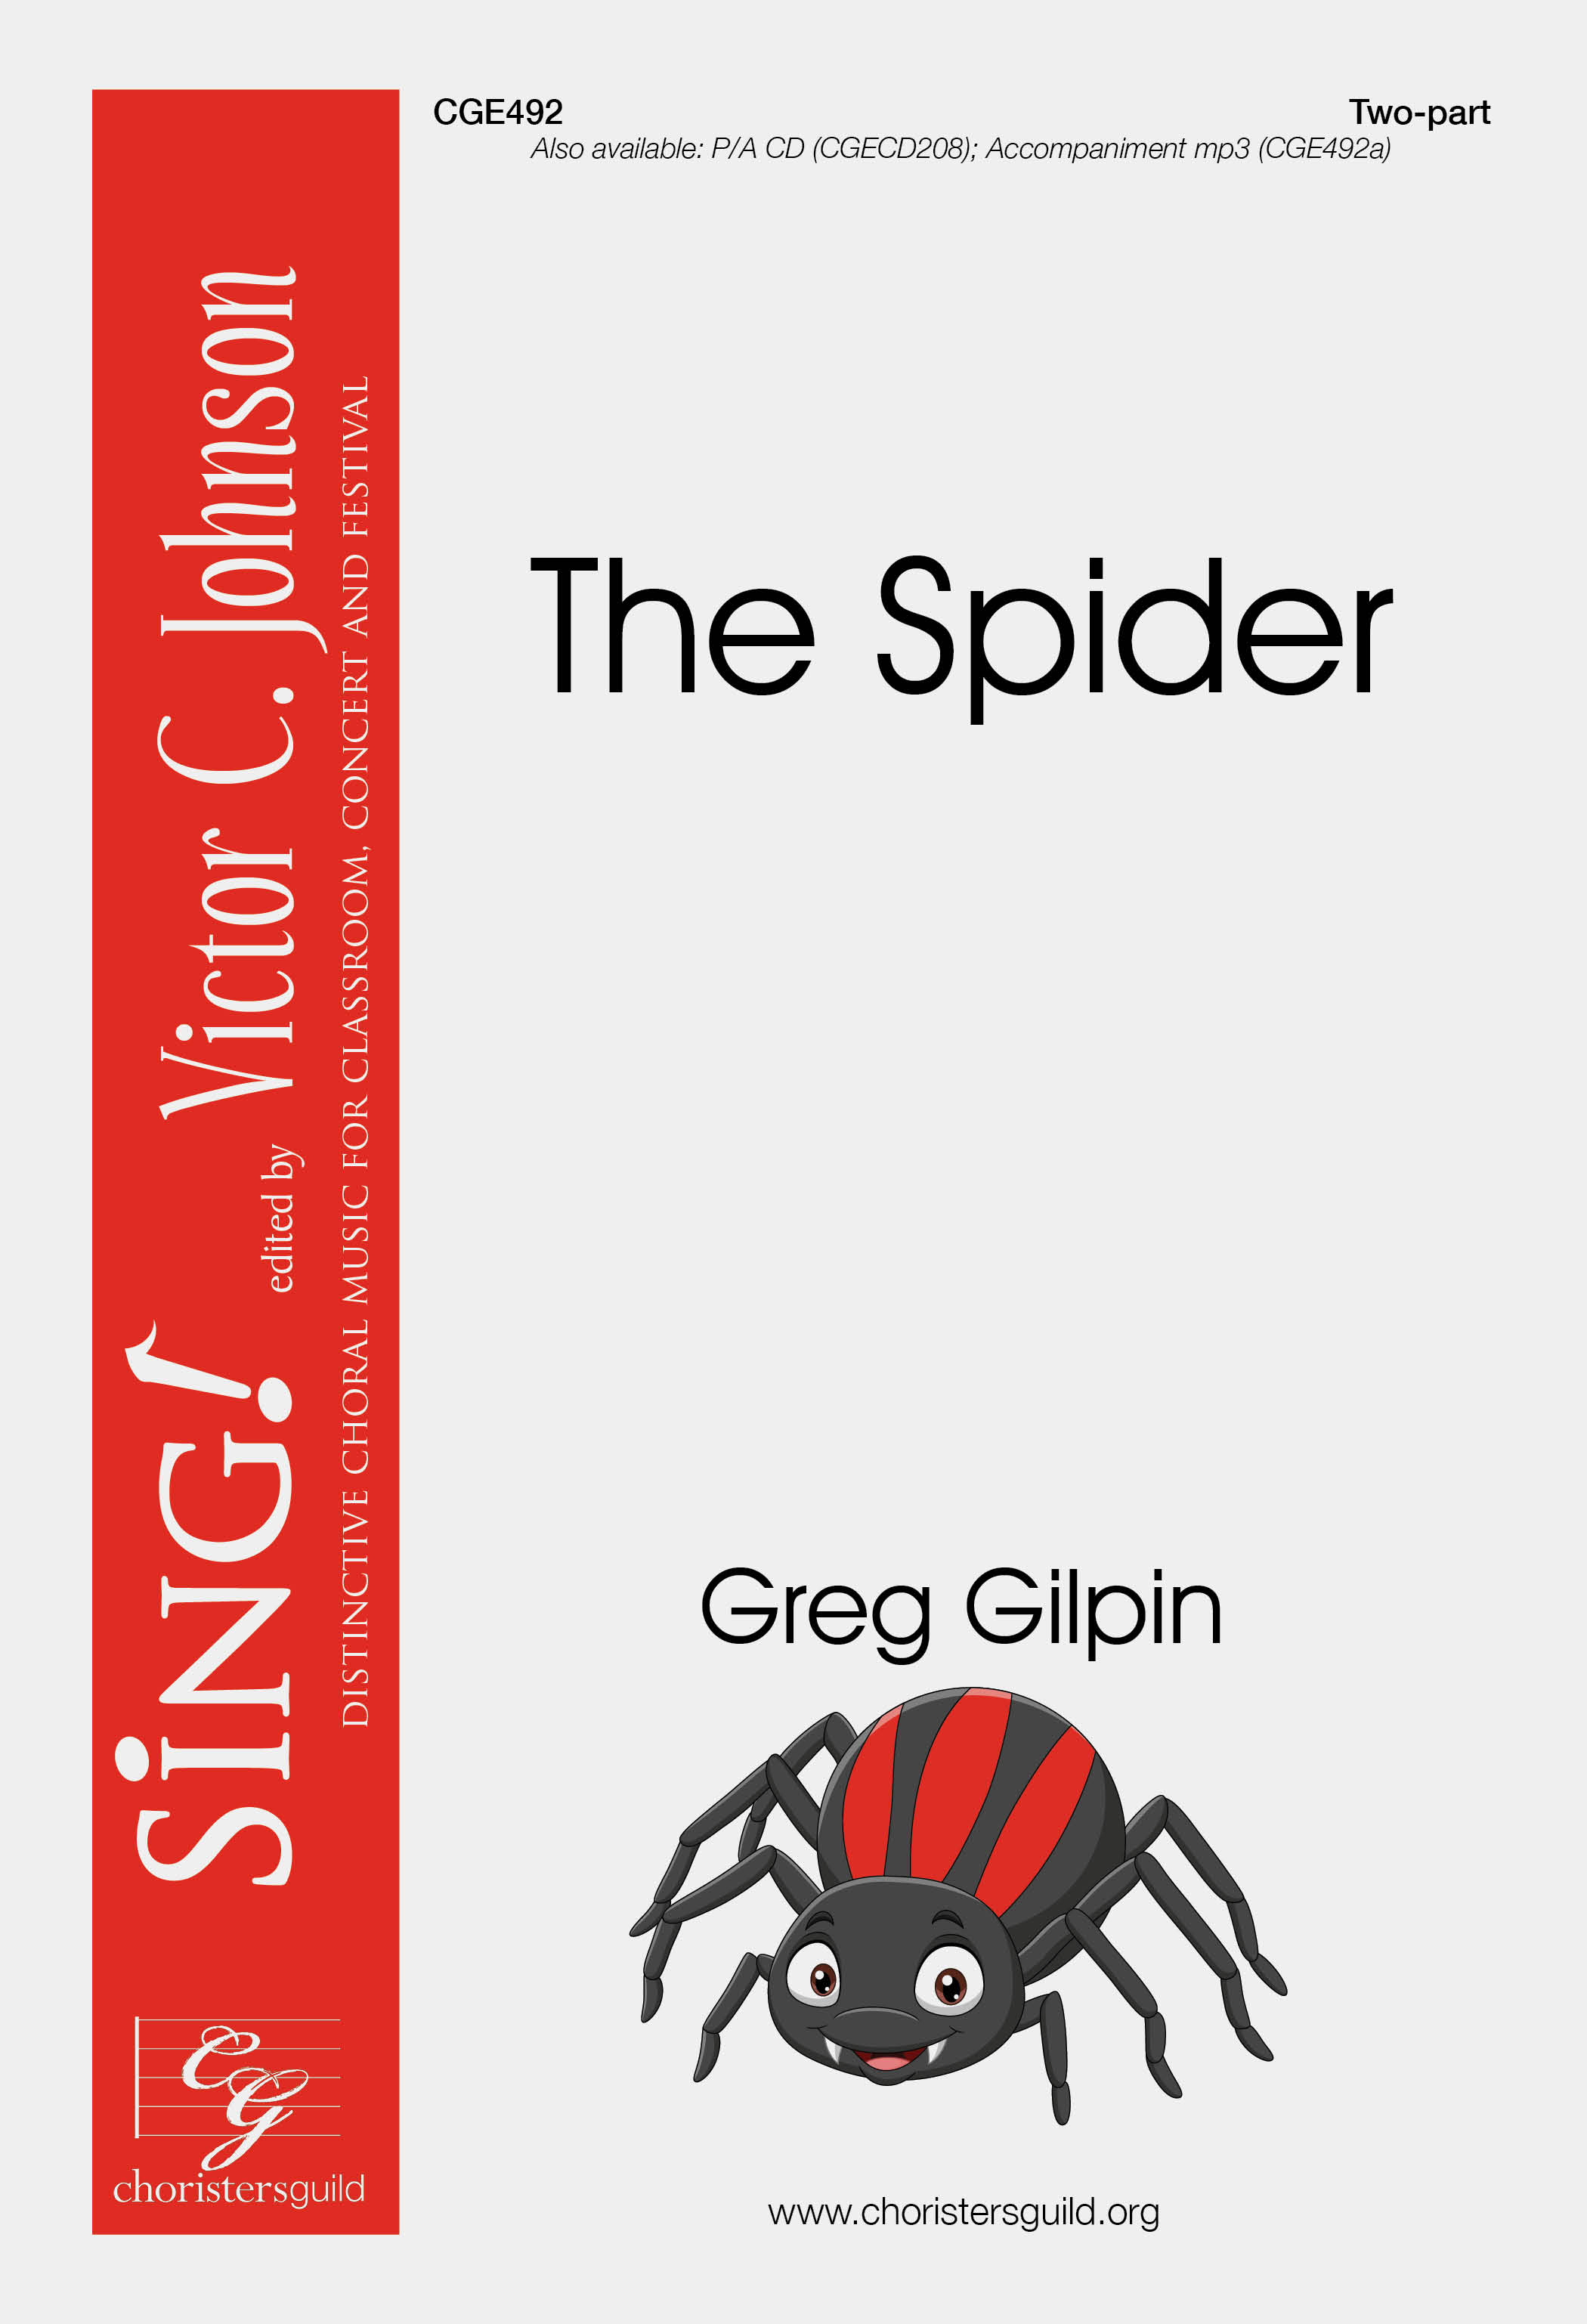 The Spider - Two-part